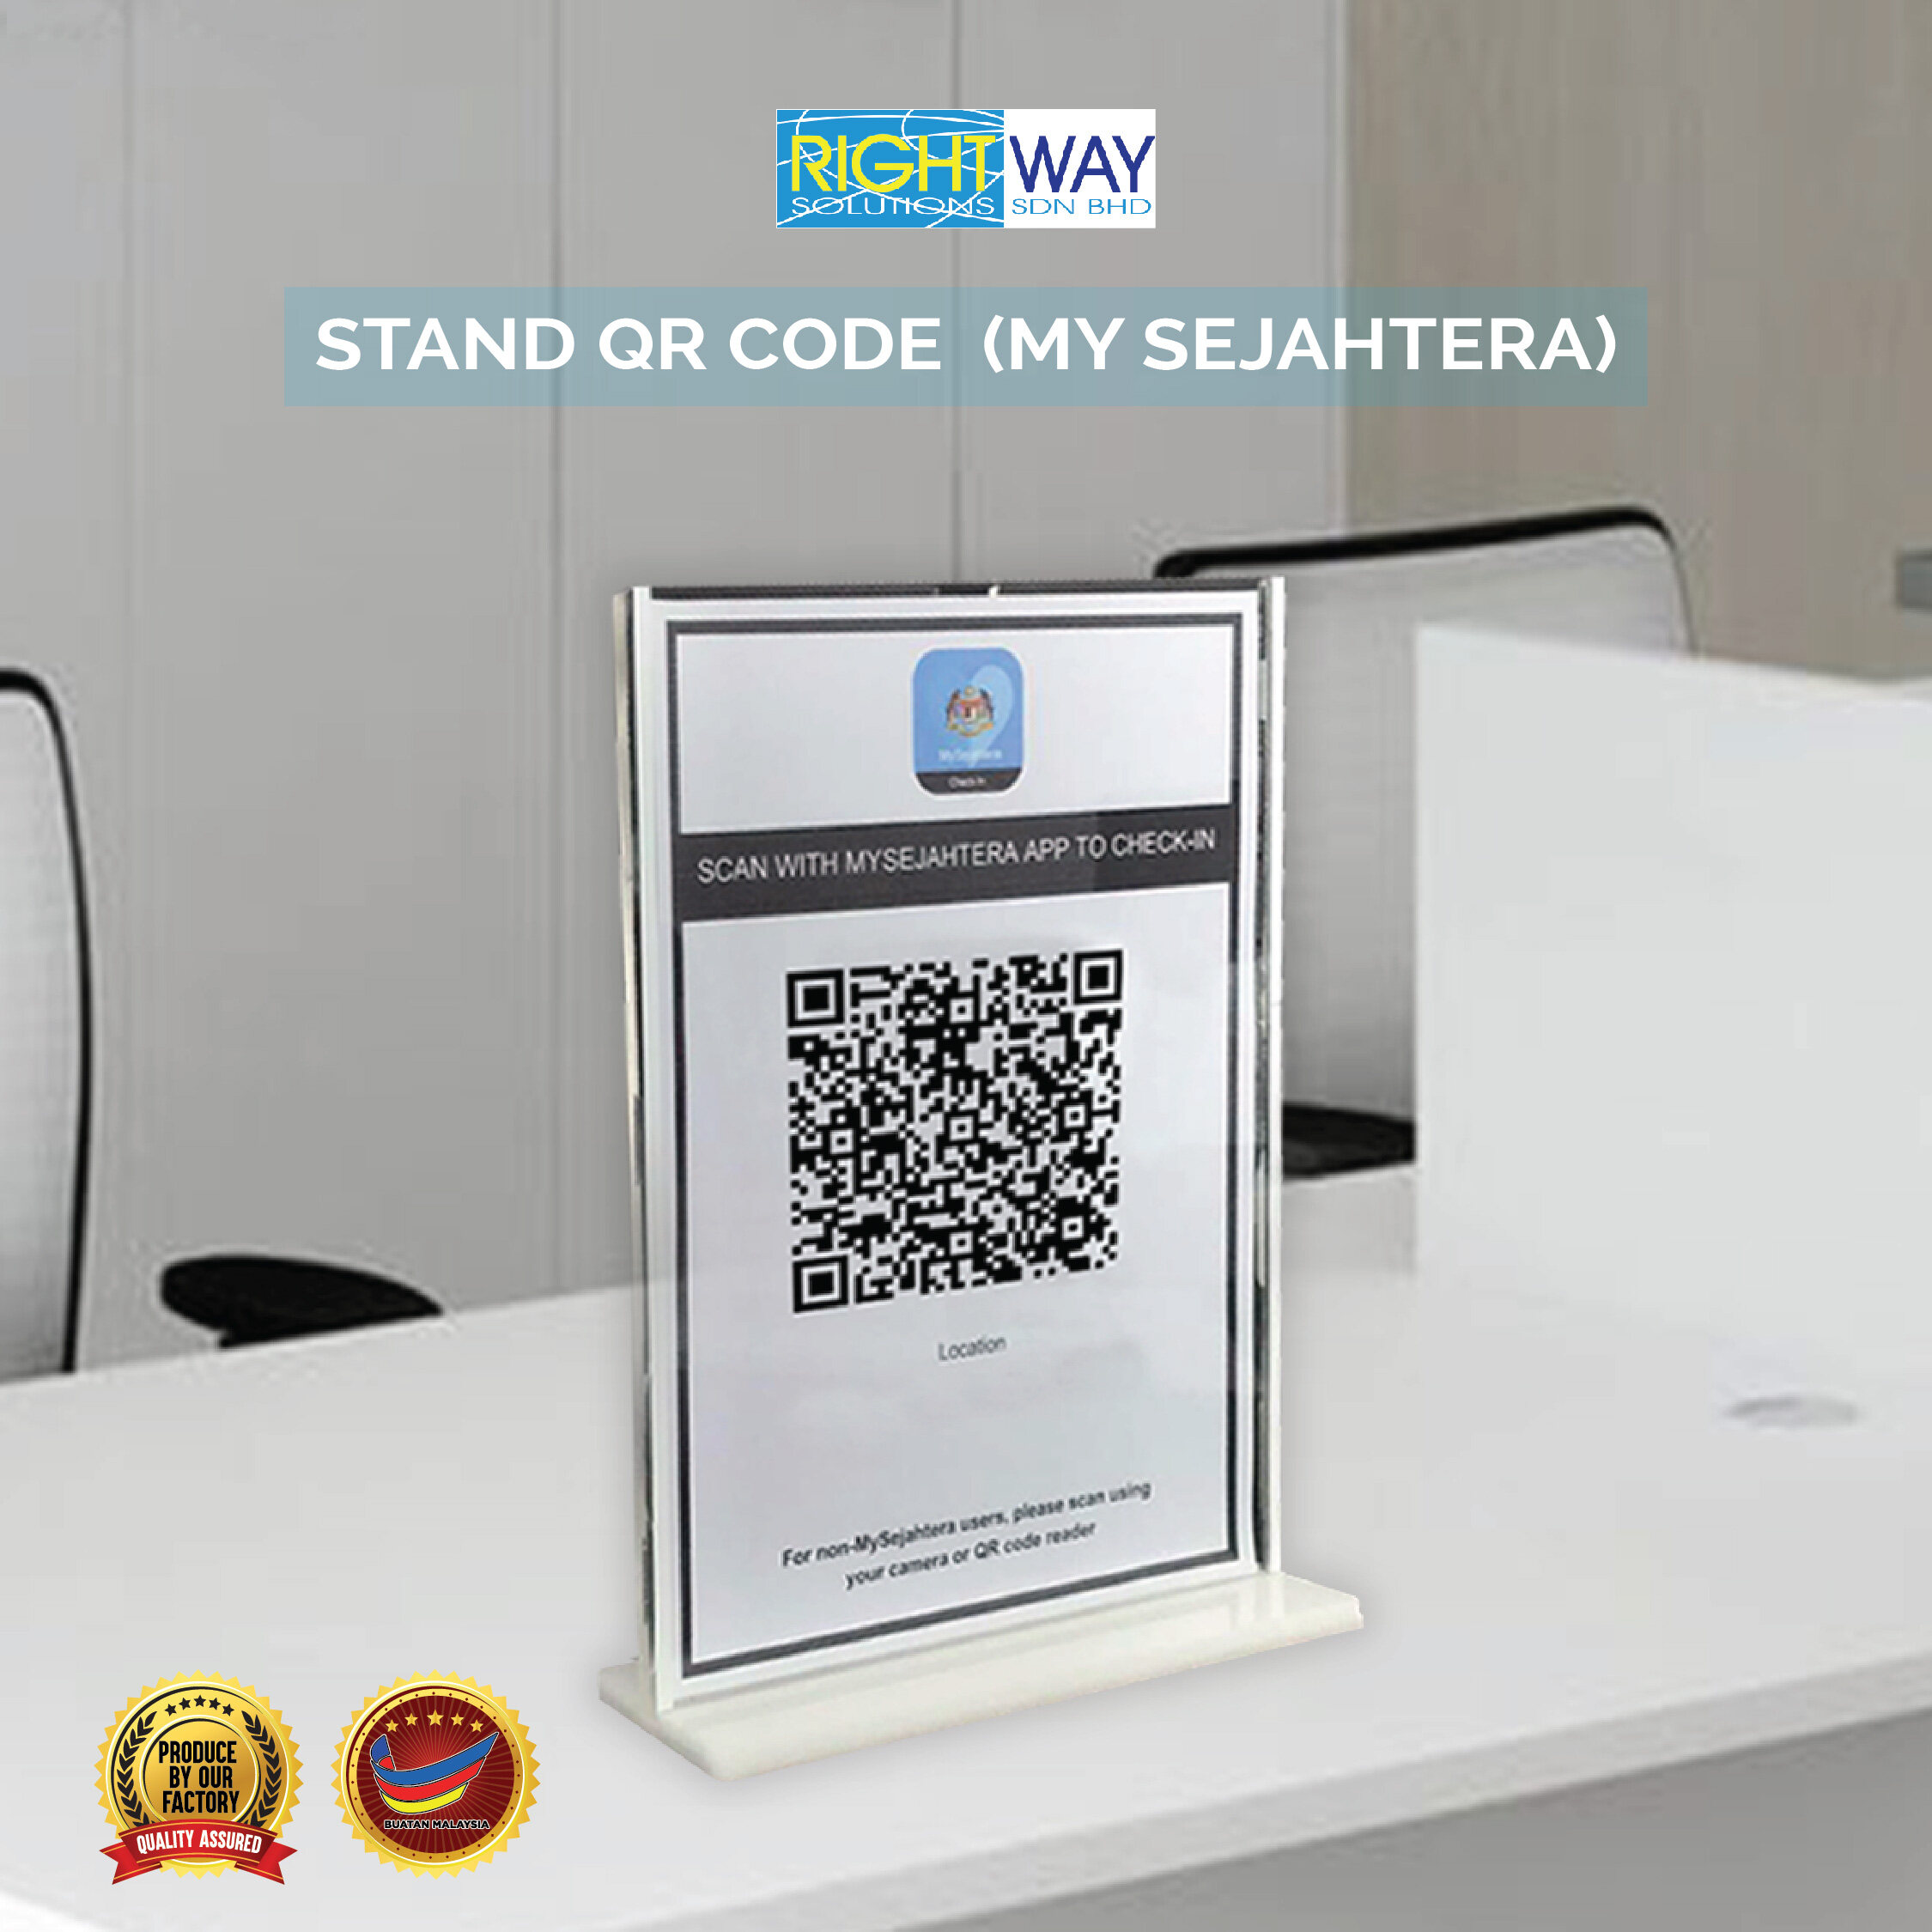 My sejahtera check-in qr code